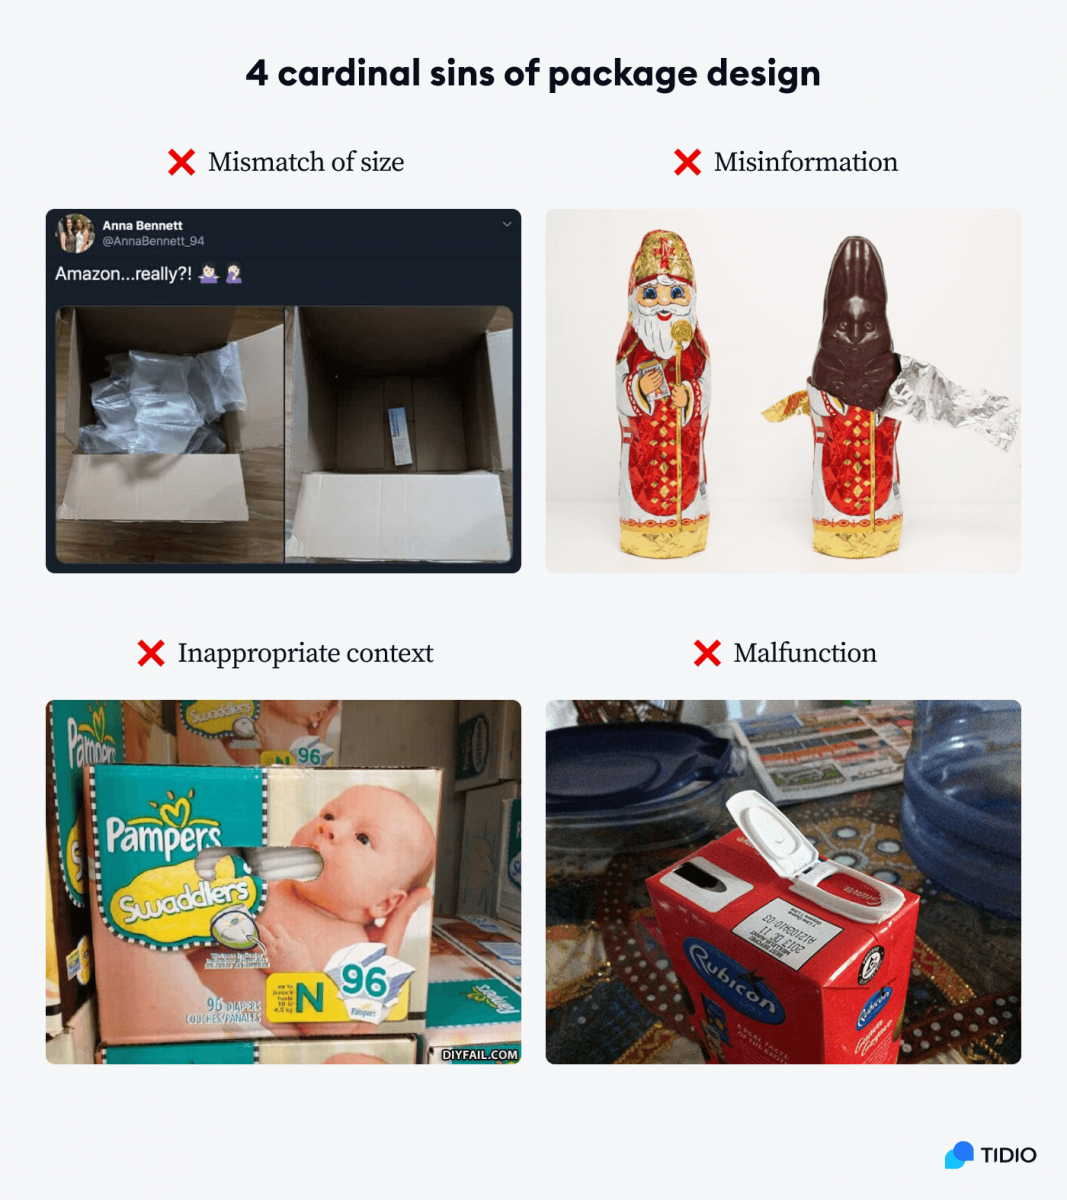 4 cardinal sins of package design examples